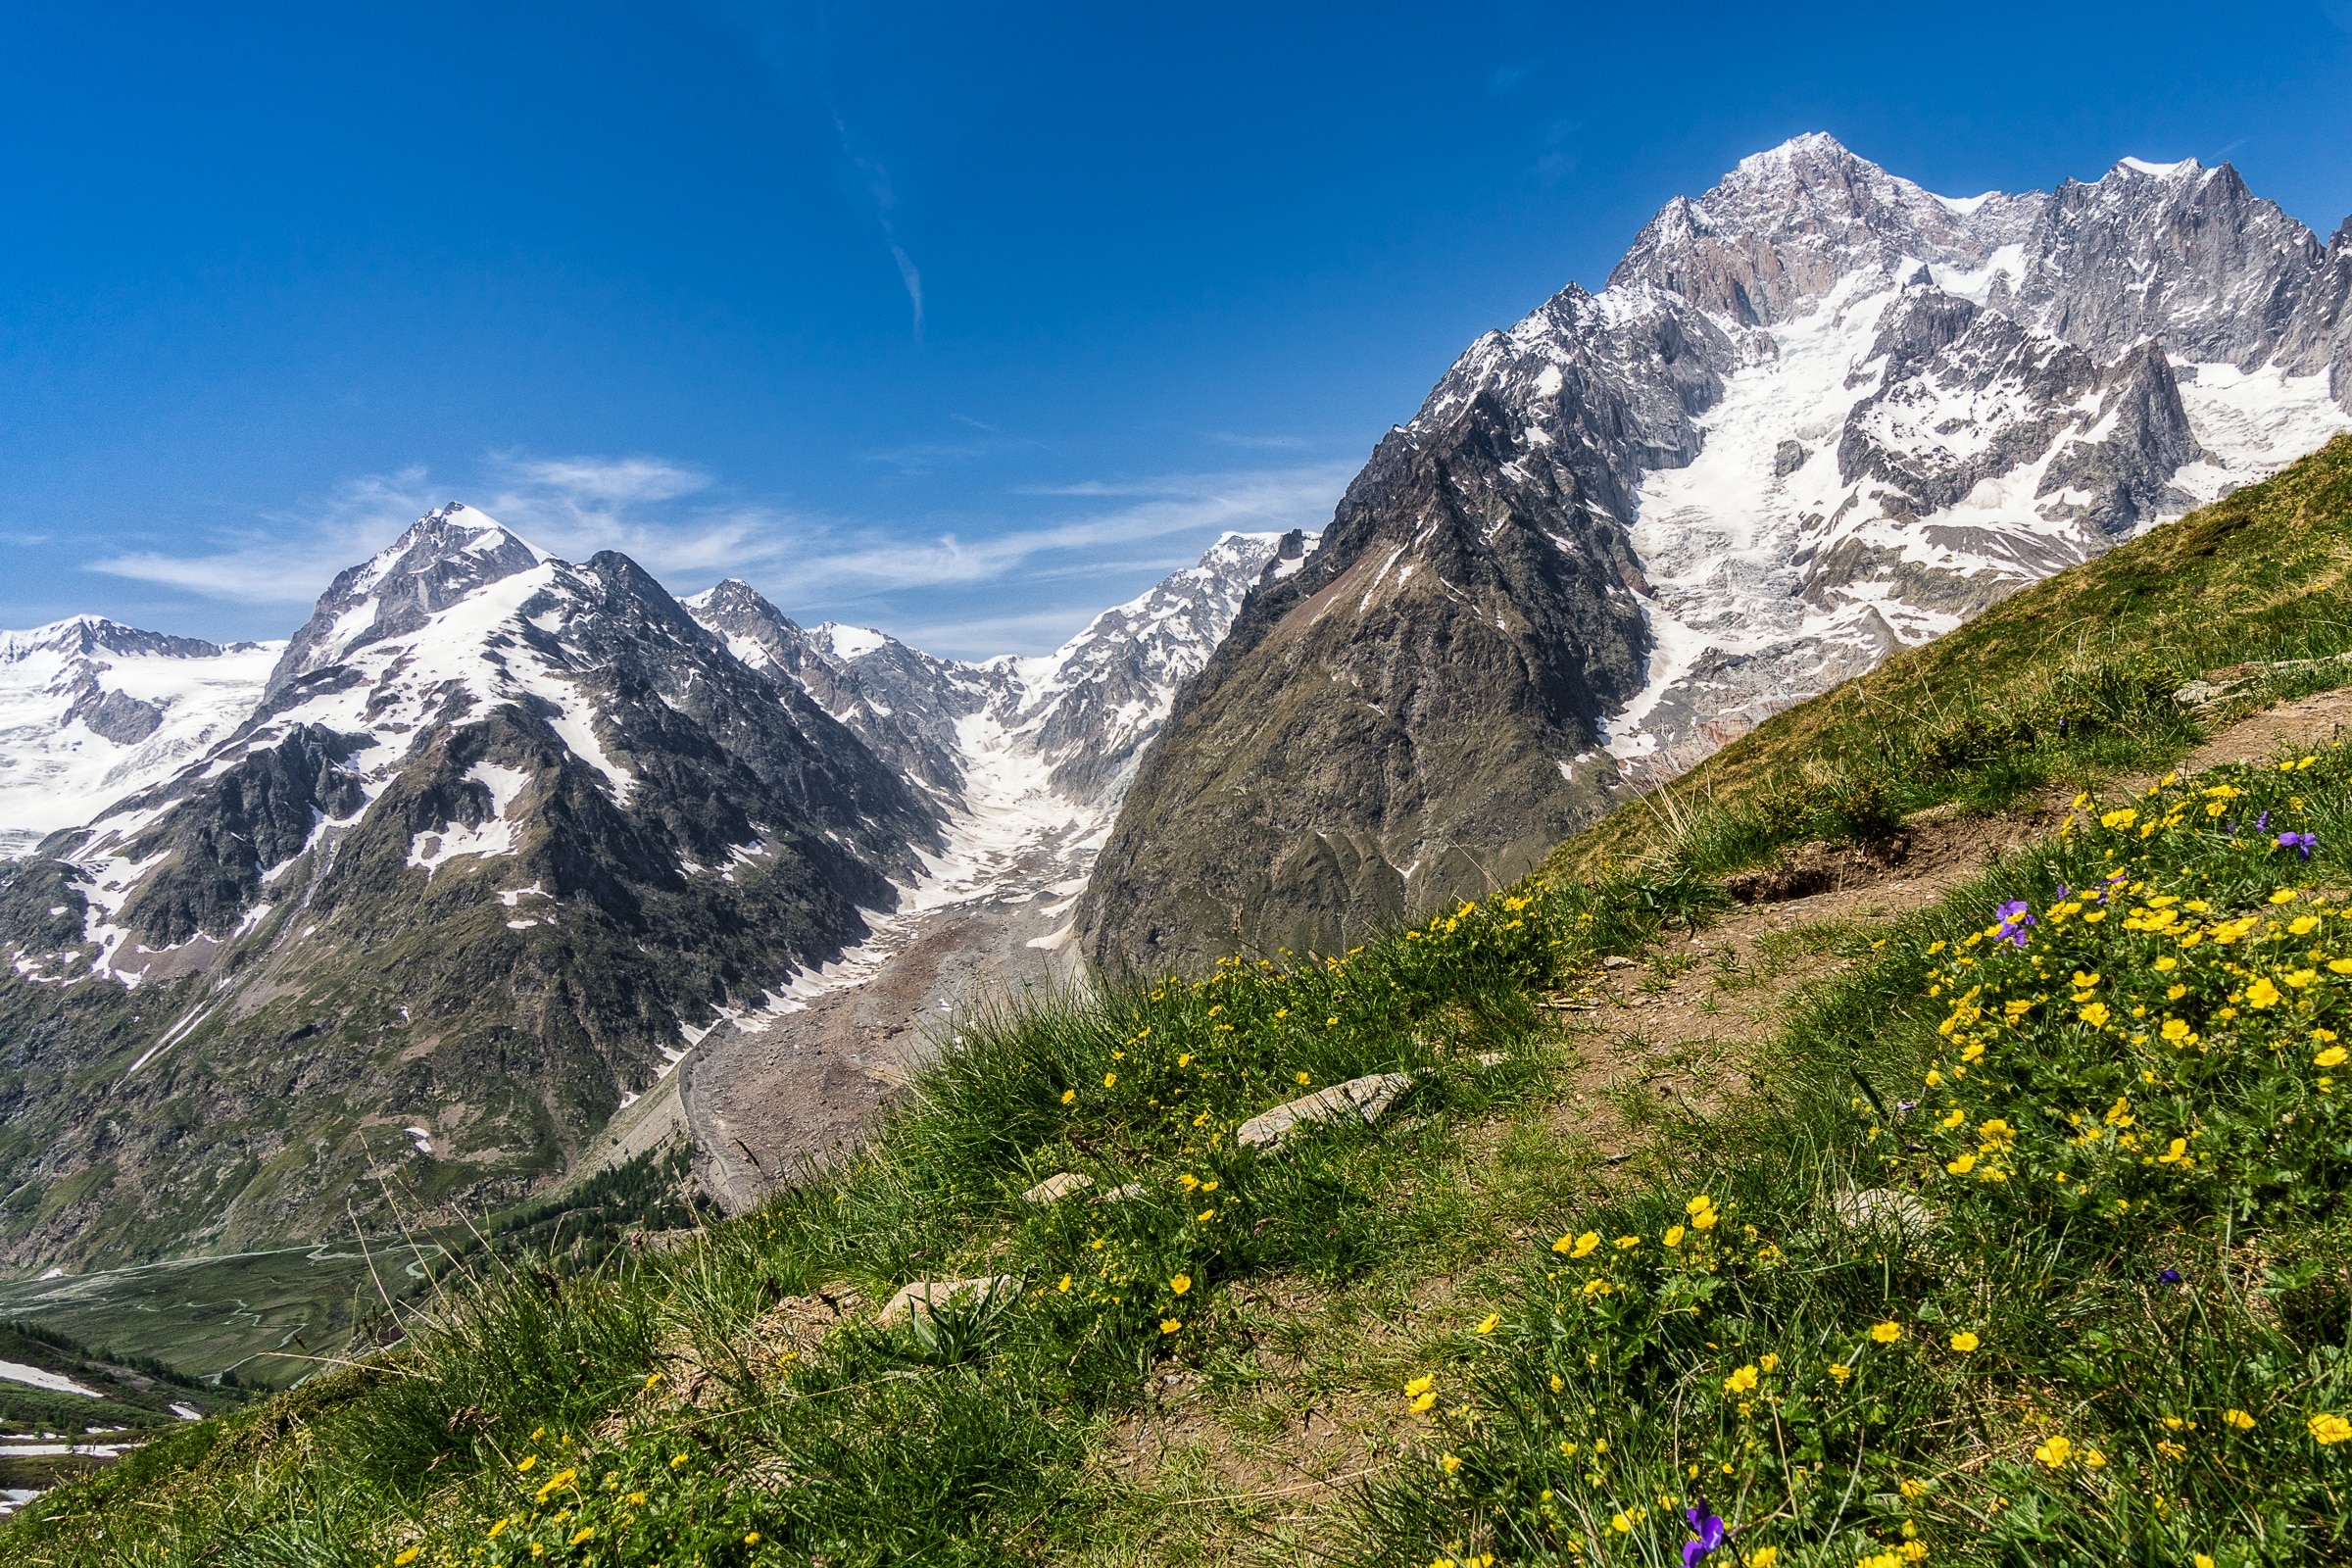 View of the Massif du Mont Blanc en route to Col Chercroui on the Tour du Mont Blanc. This section of the trail offers some of the best unobstructed views of the entire circuit. 